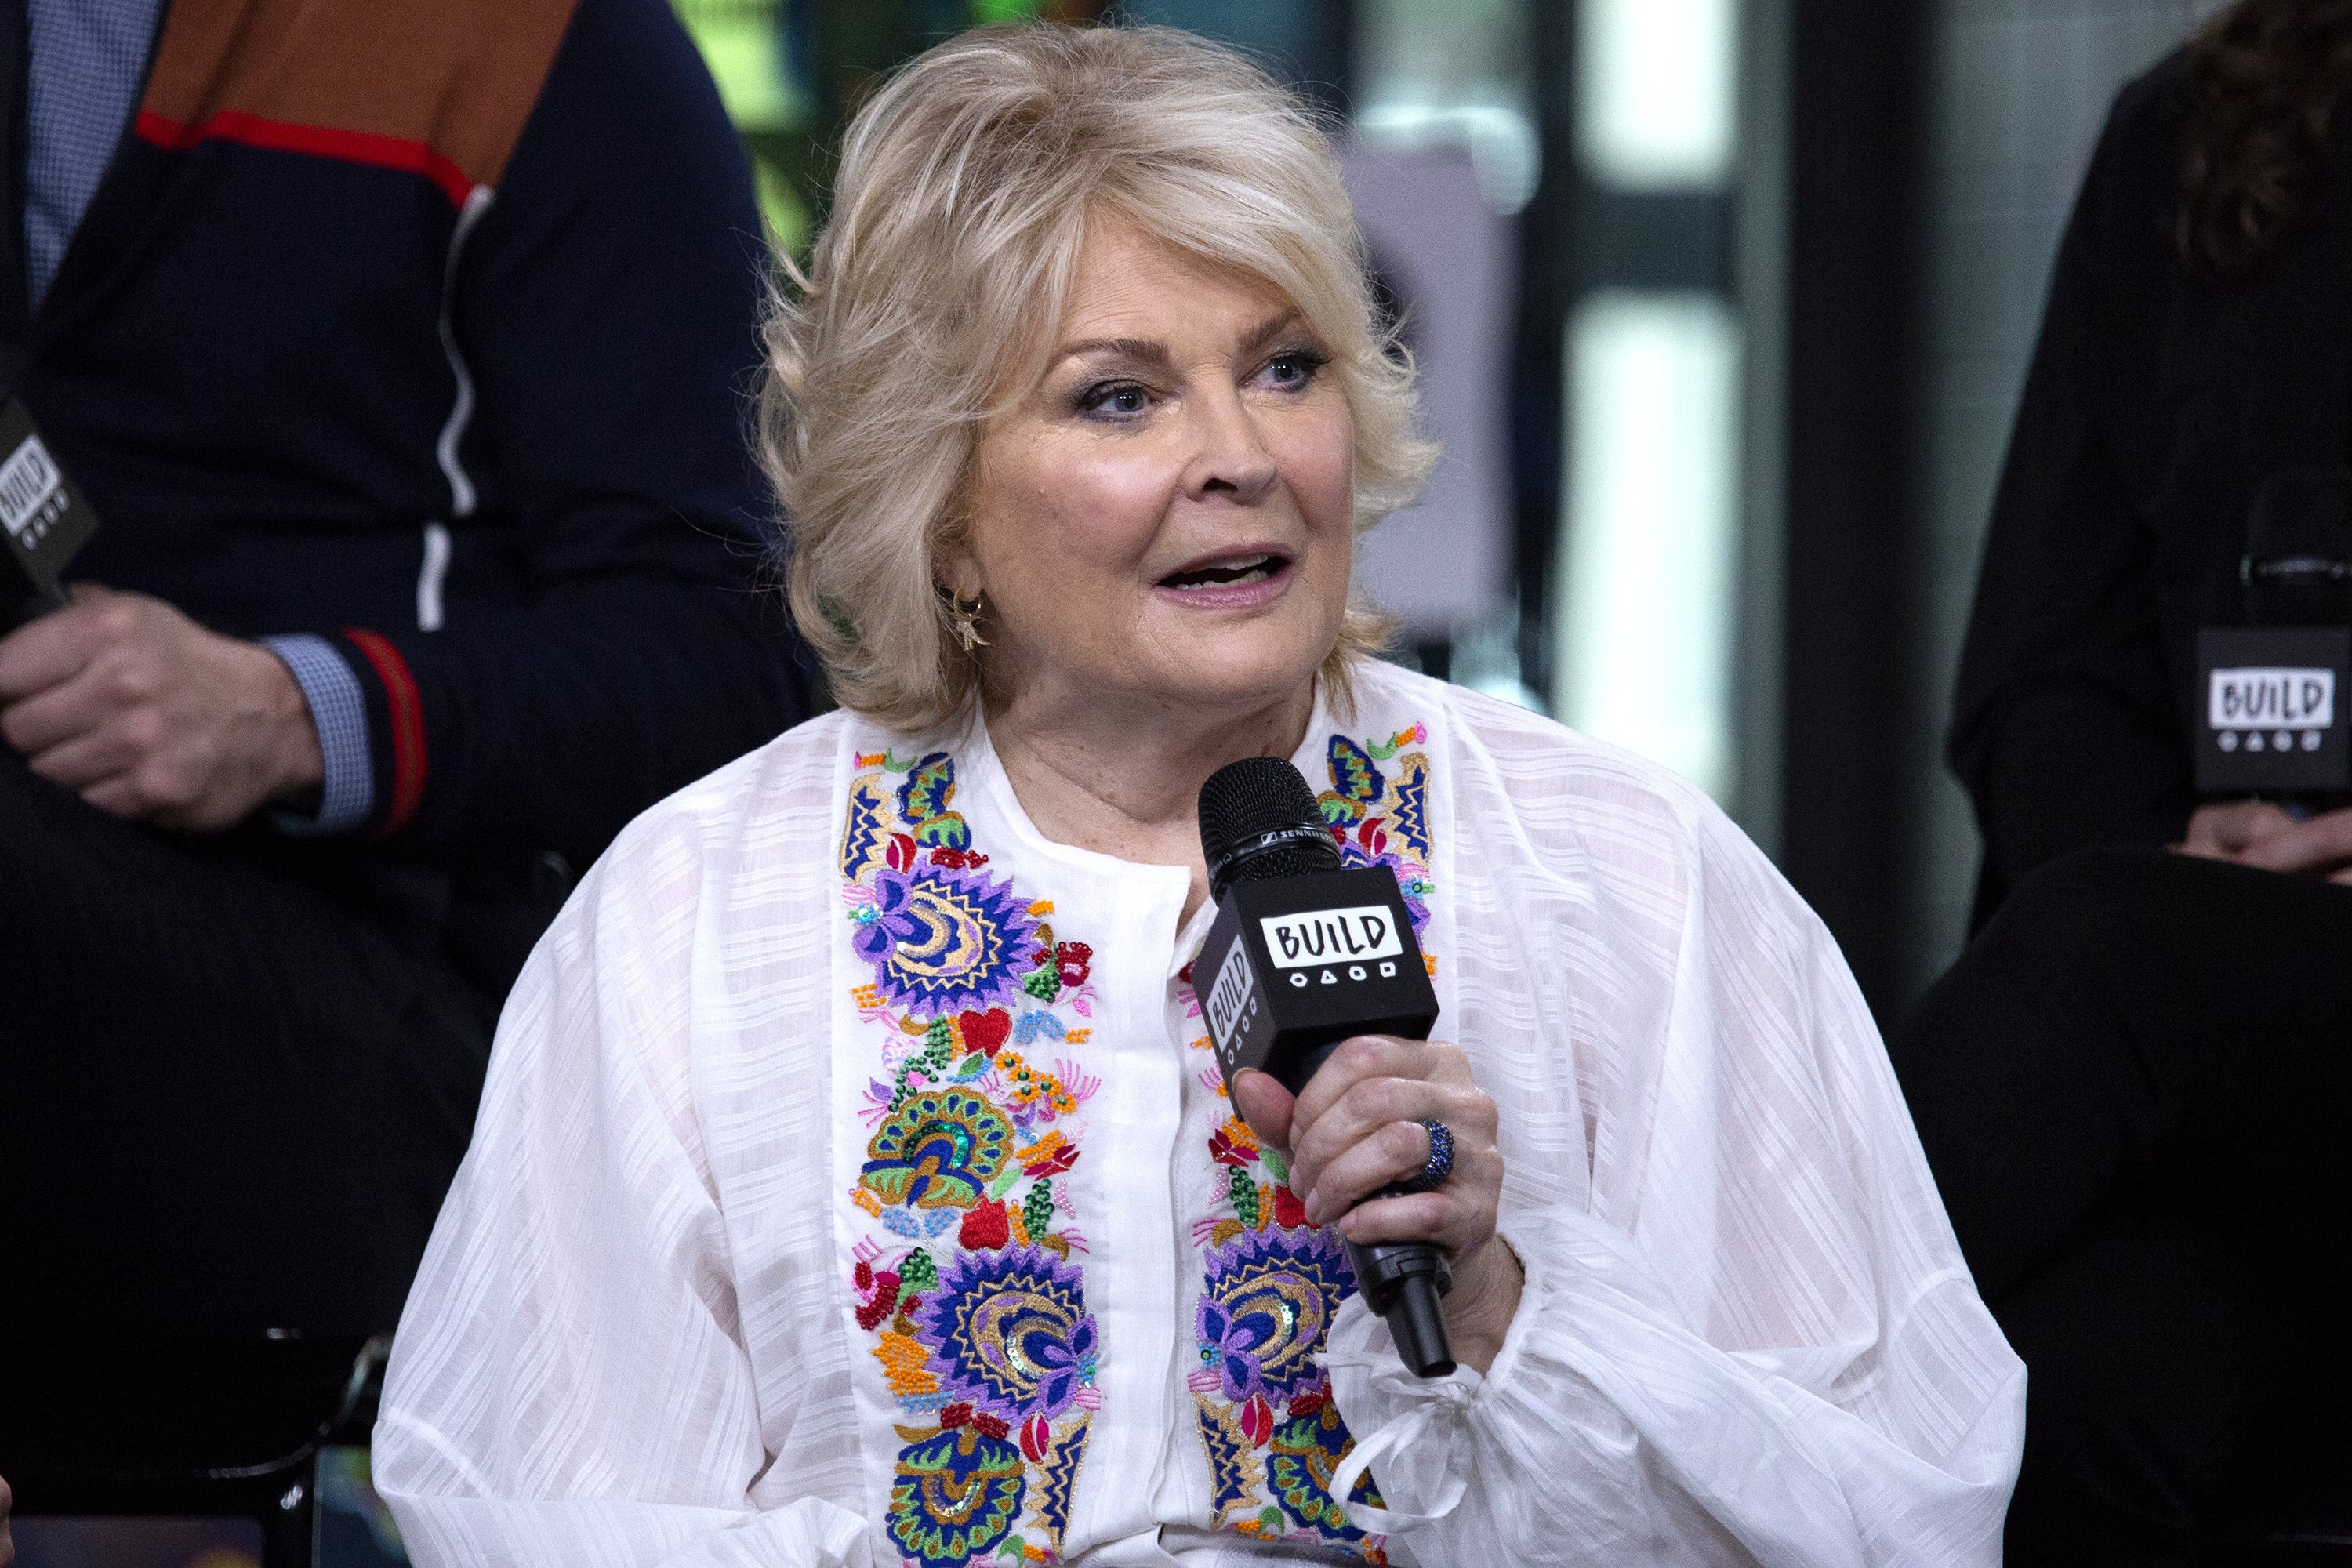 Candice Bergen visits AOL Build at Build Studio on May 15, 2018 | Photo: GettyImages